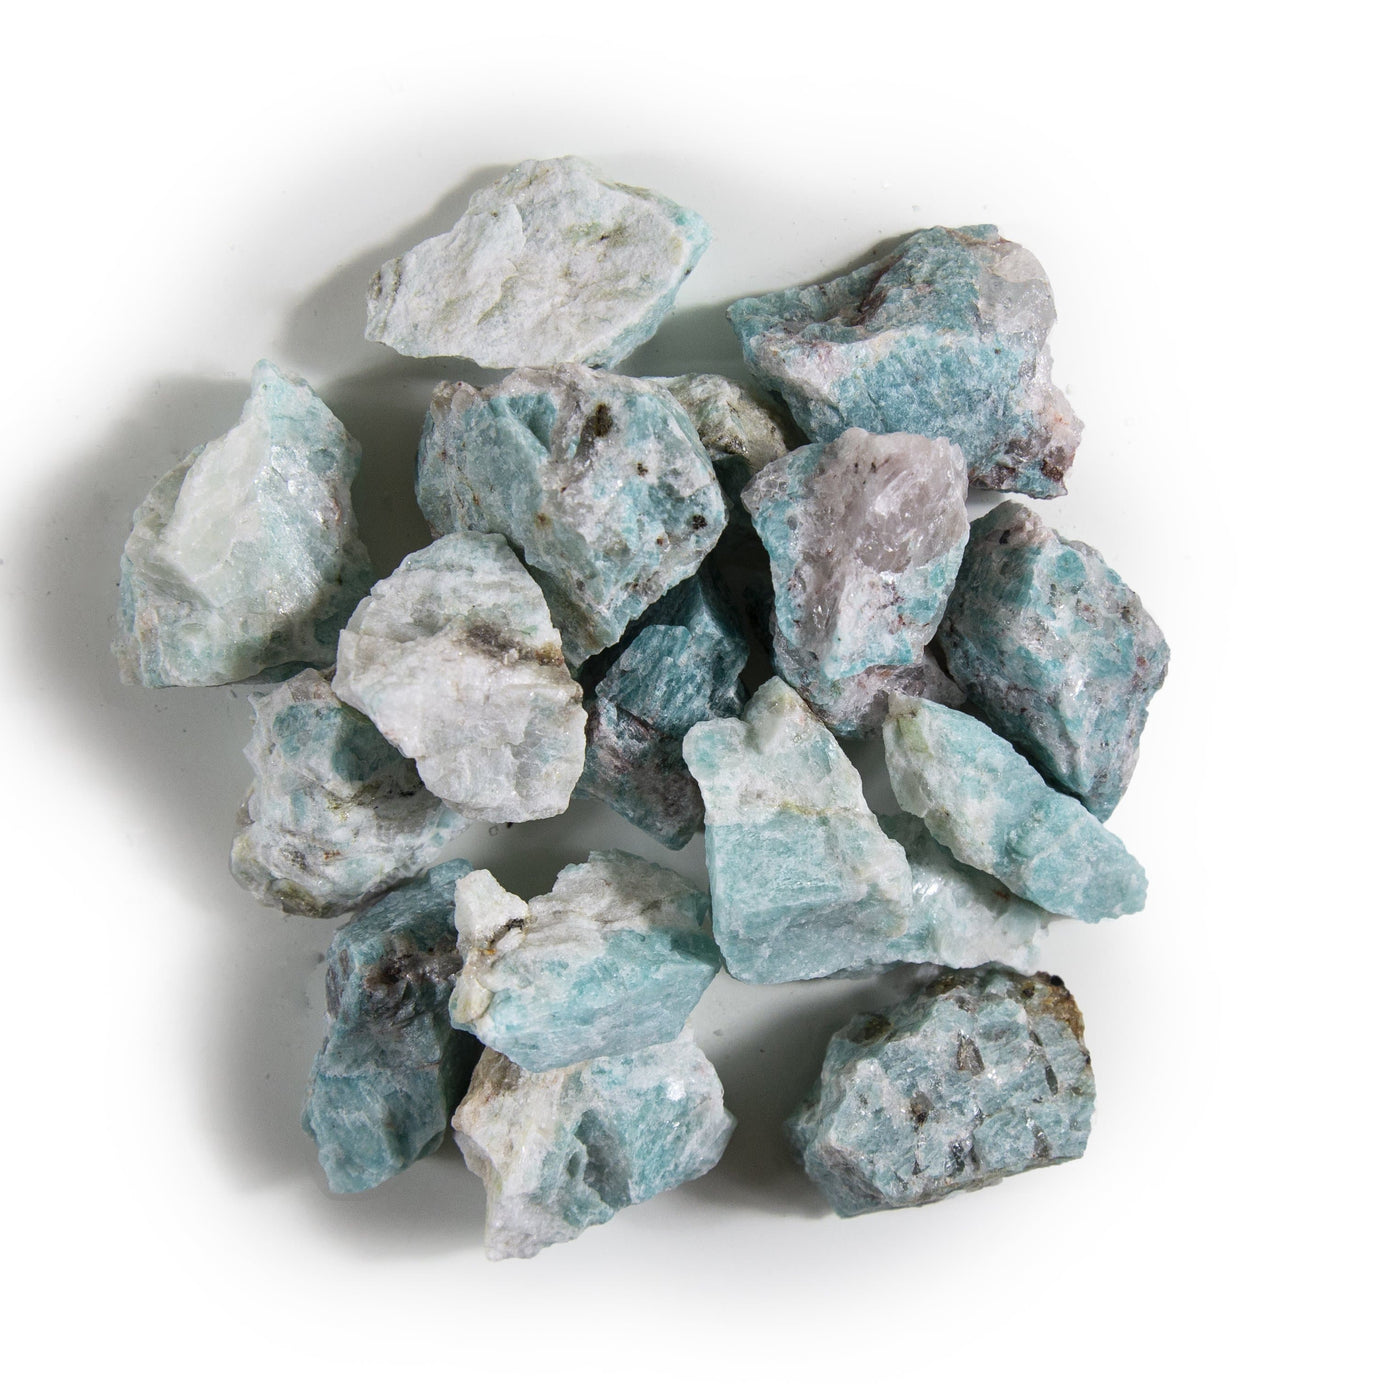 Picture of amazonite chunks being displayed on a white background.